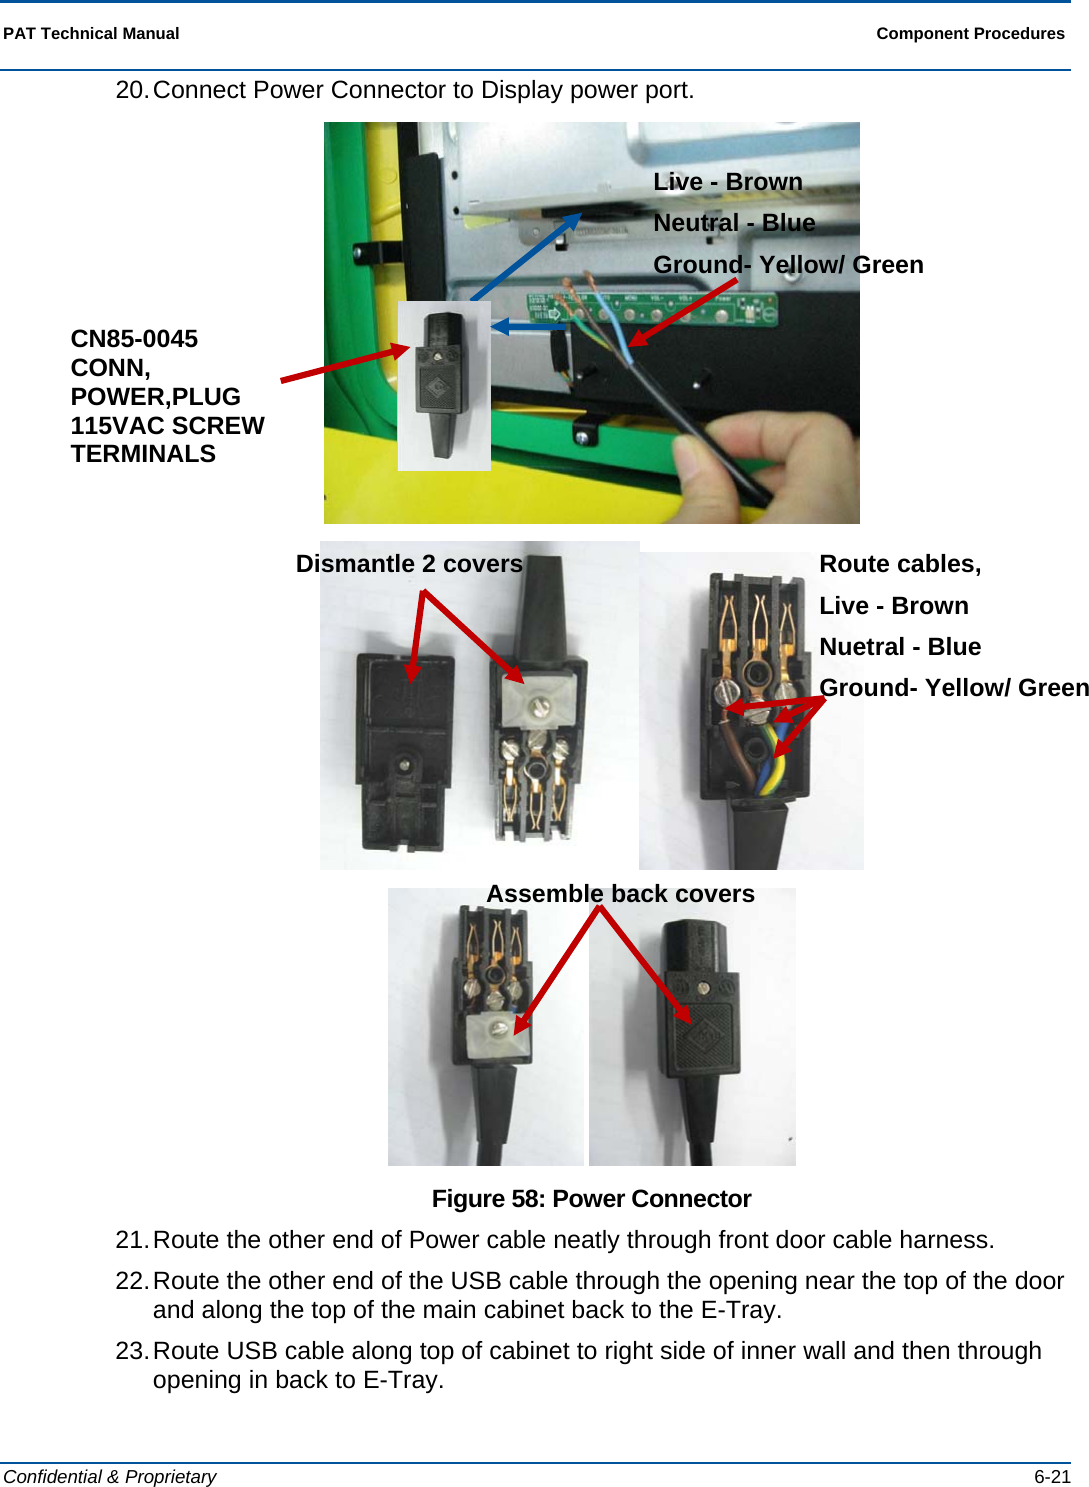  PAT Technical Manual  Component Procedures  Confidential &amp; Proprietary   6-21 20. Connect Power Connector to Display power port.      Figure 58: Power Connector 21. Route the other end of Power cable neatly through front door cable harness. 22. Route the other end of the USB cable through the opening near the top of the door and along the top of the main cabinet back to the E-Tray. 23. Route USB cable along top of cabinet to right side of inner wall and then through opening in back to E-Tray. CN85-0045 CONN, POWER,PLUG 115VAC SCREW TERMINALS Live - Brown Neutral - Blue Ground- Yellow/ Green Dismantle 2 covers  Route cables,  Live - Brown Nuetral - Blue Ground- Yellow/ GreenAssemble back covers 